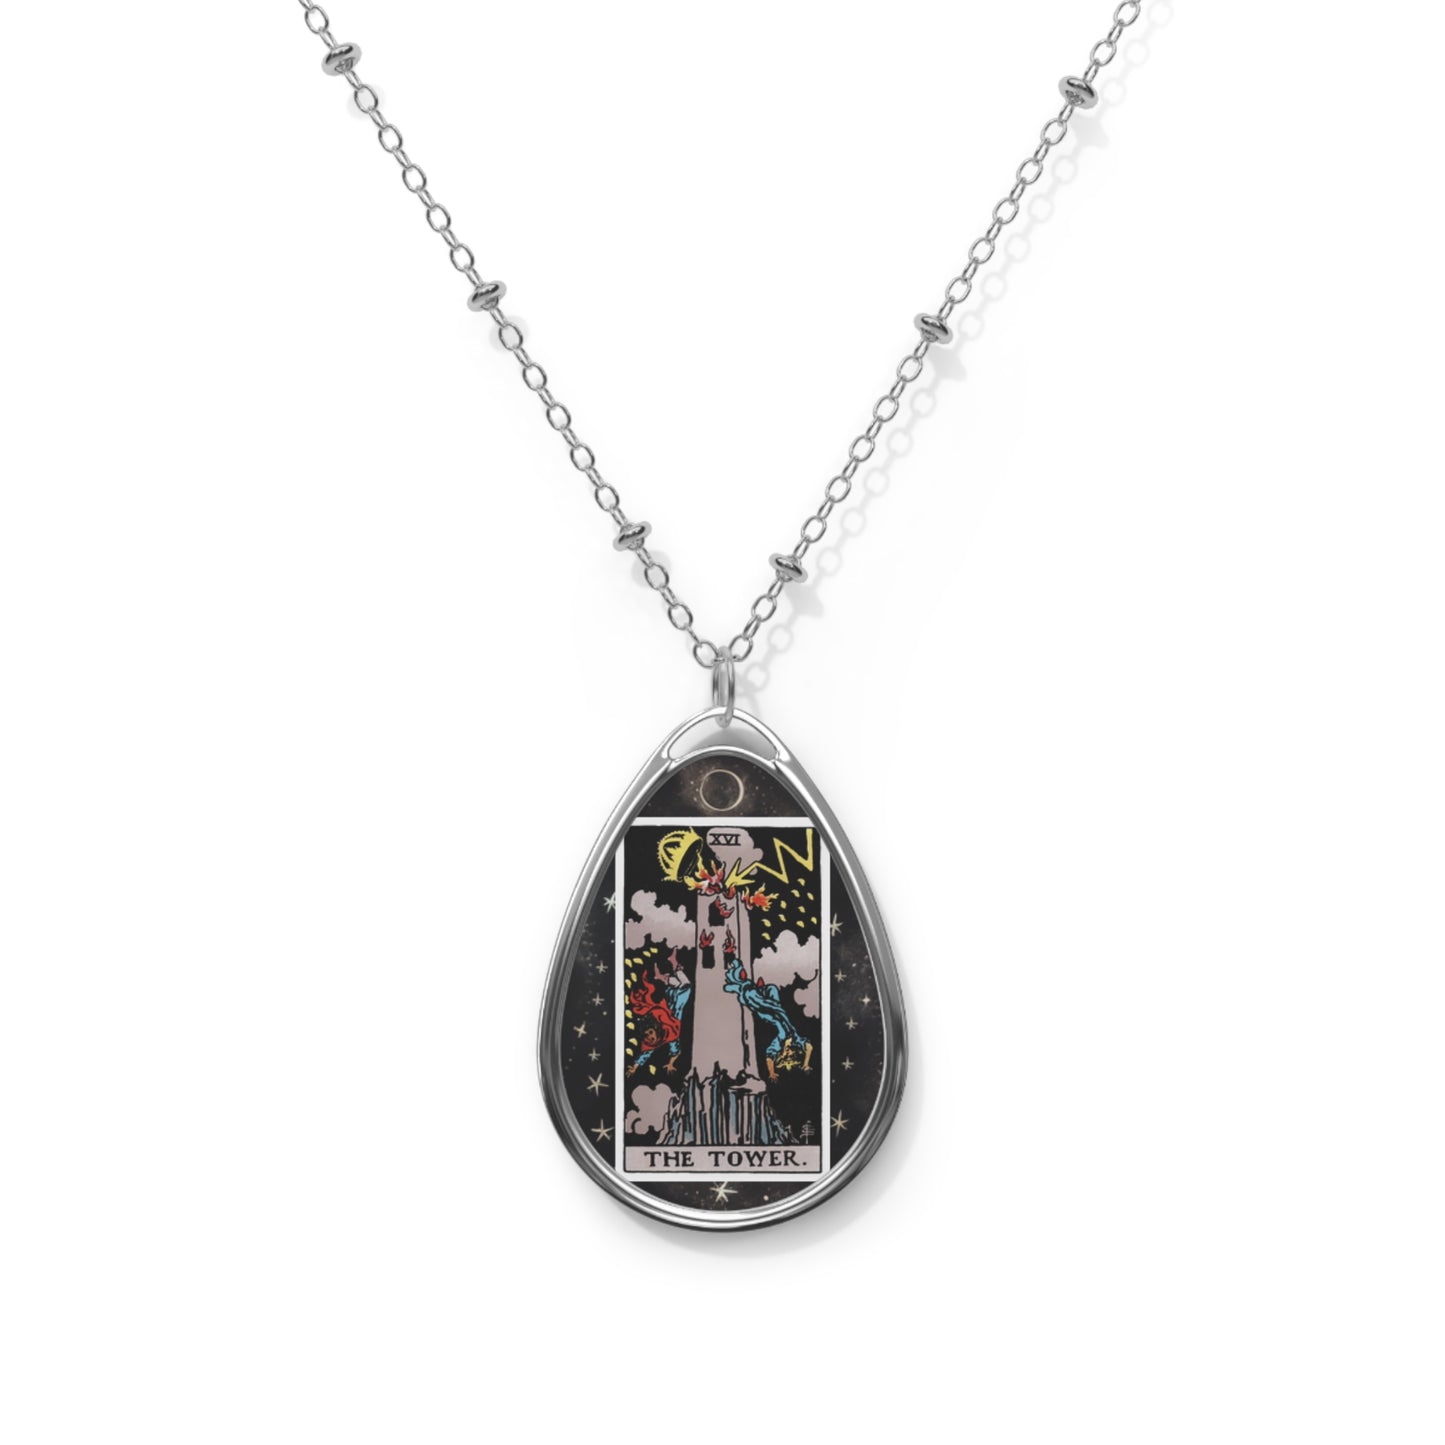 The Tower Tarot Card Oval Pendant Necklace With Chain